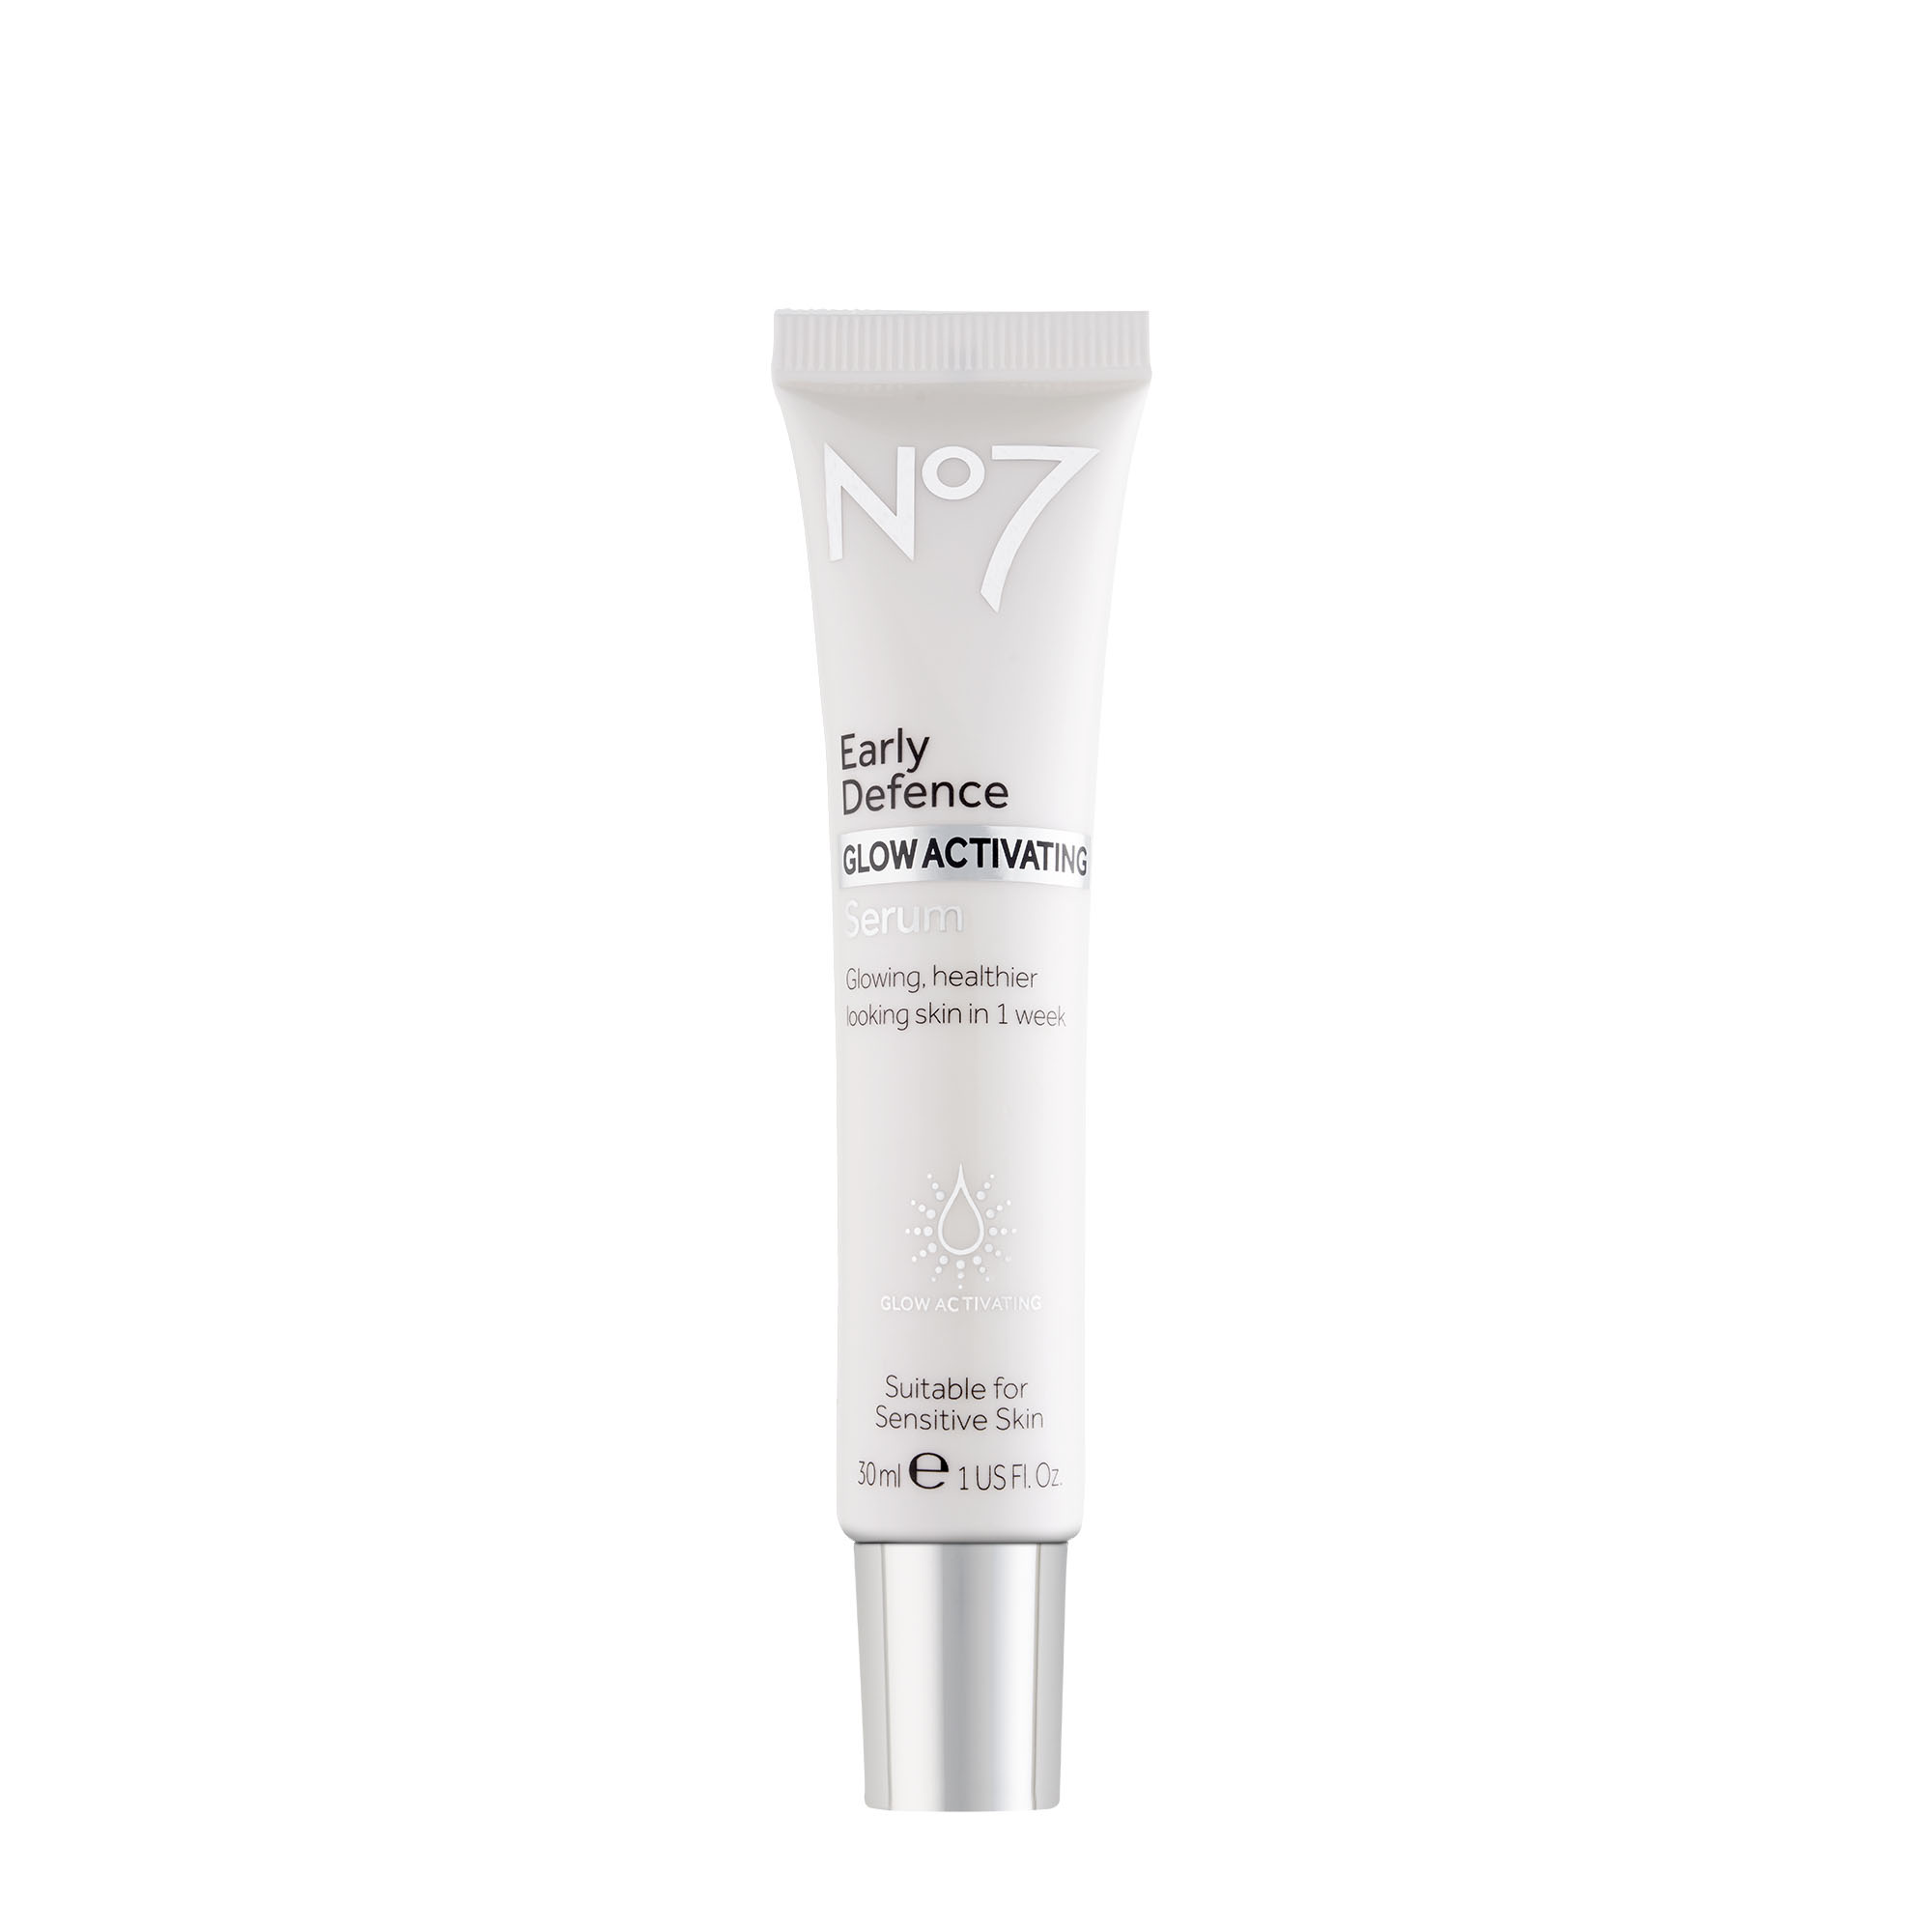 No7 Early Defense Glow Activating Serum